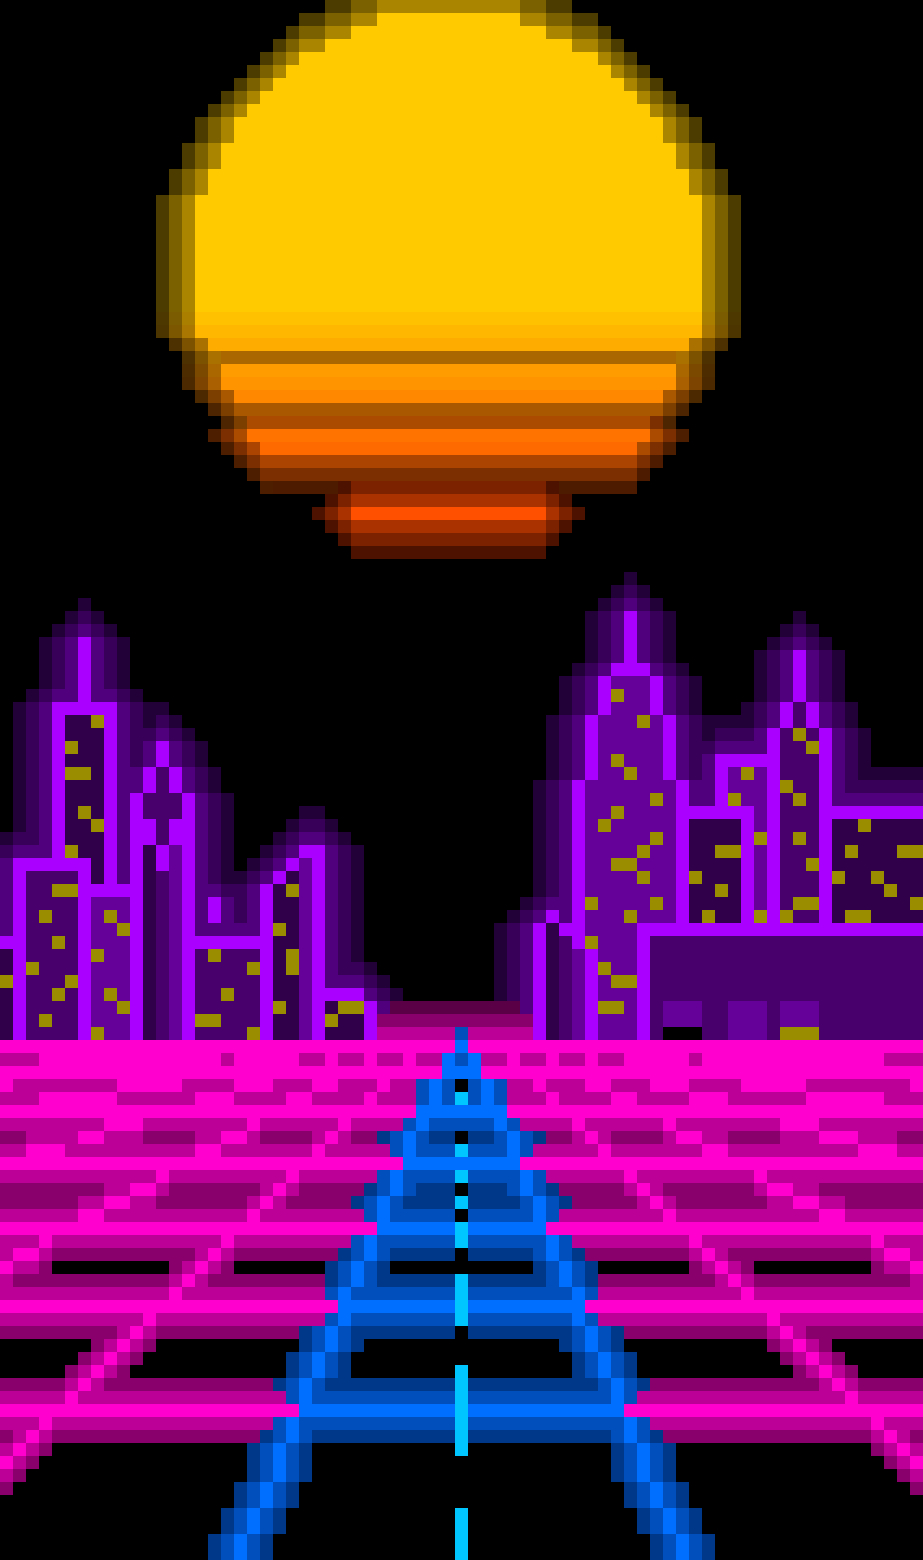 I Wanted To Make A Pixel Art Outrun Phone Wallpaper - Illustration , HD Wallpaper & Backgrounds